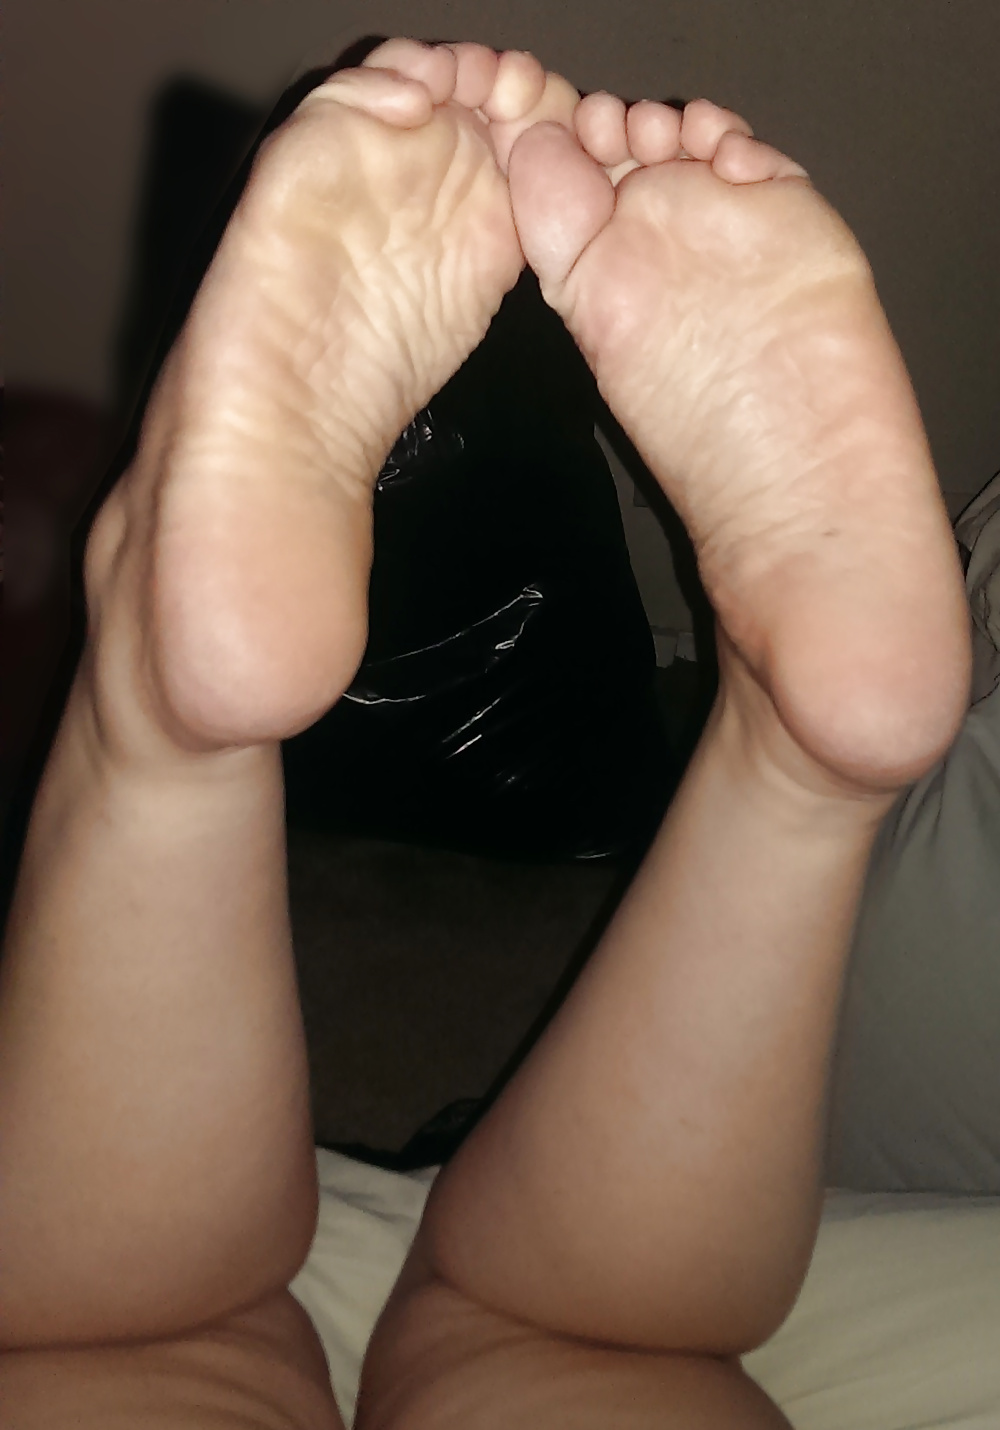 Free My wife's pretty legs and feet photos